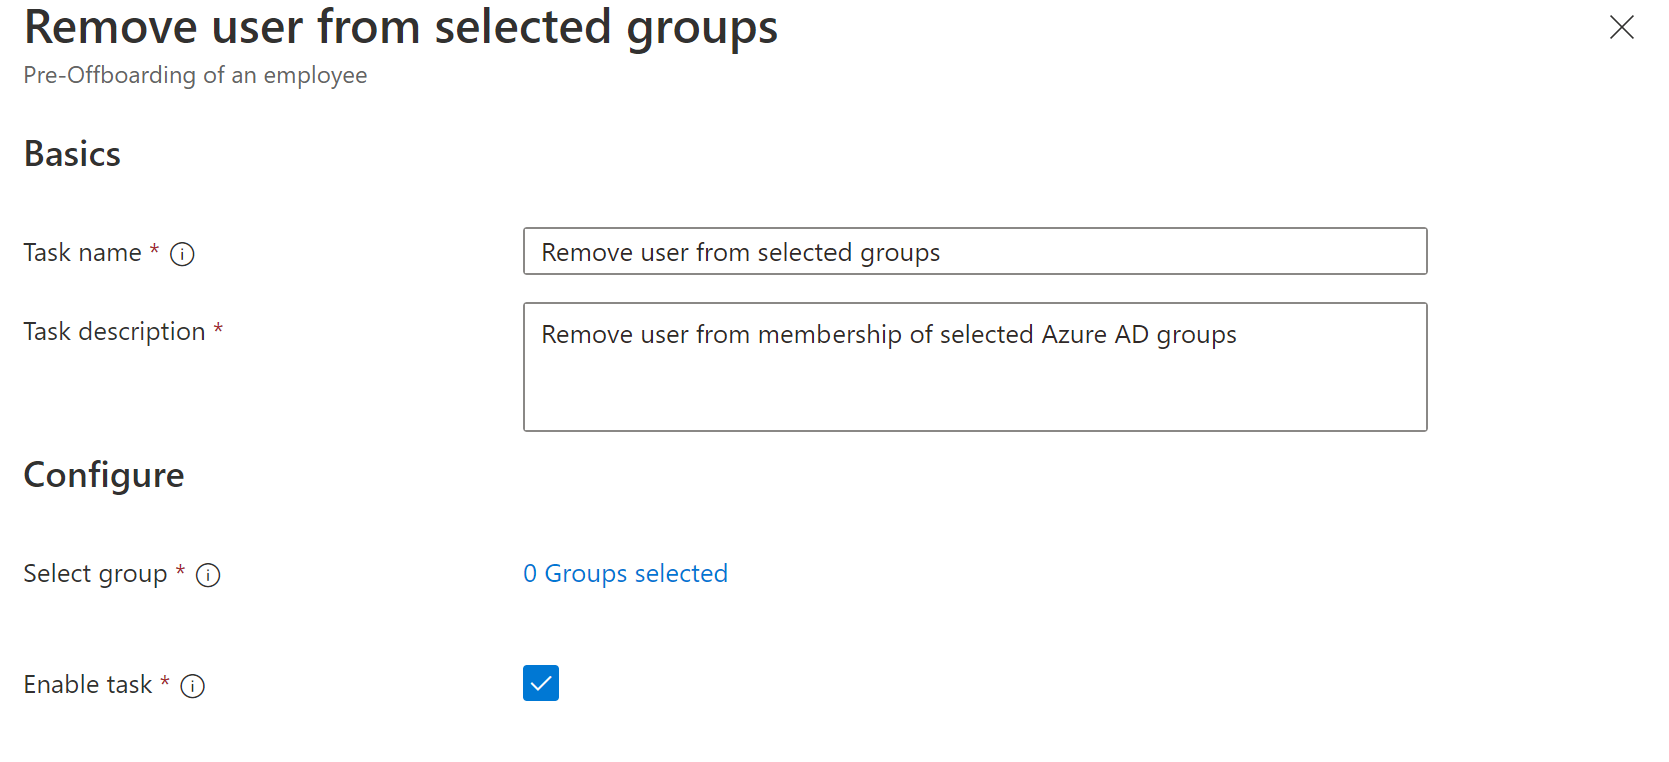 Screenshot of Workflows task: Remove user from select groups.